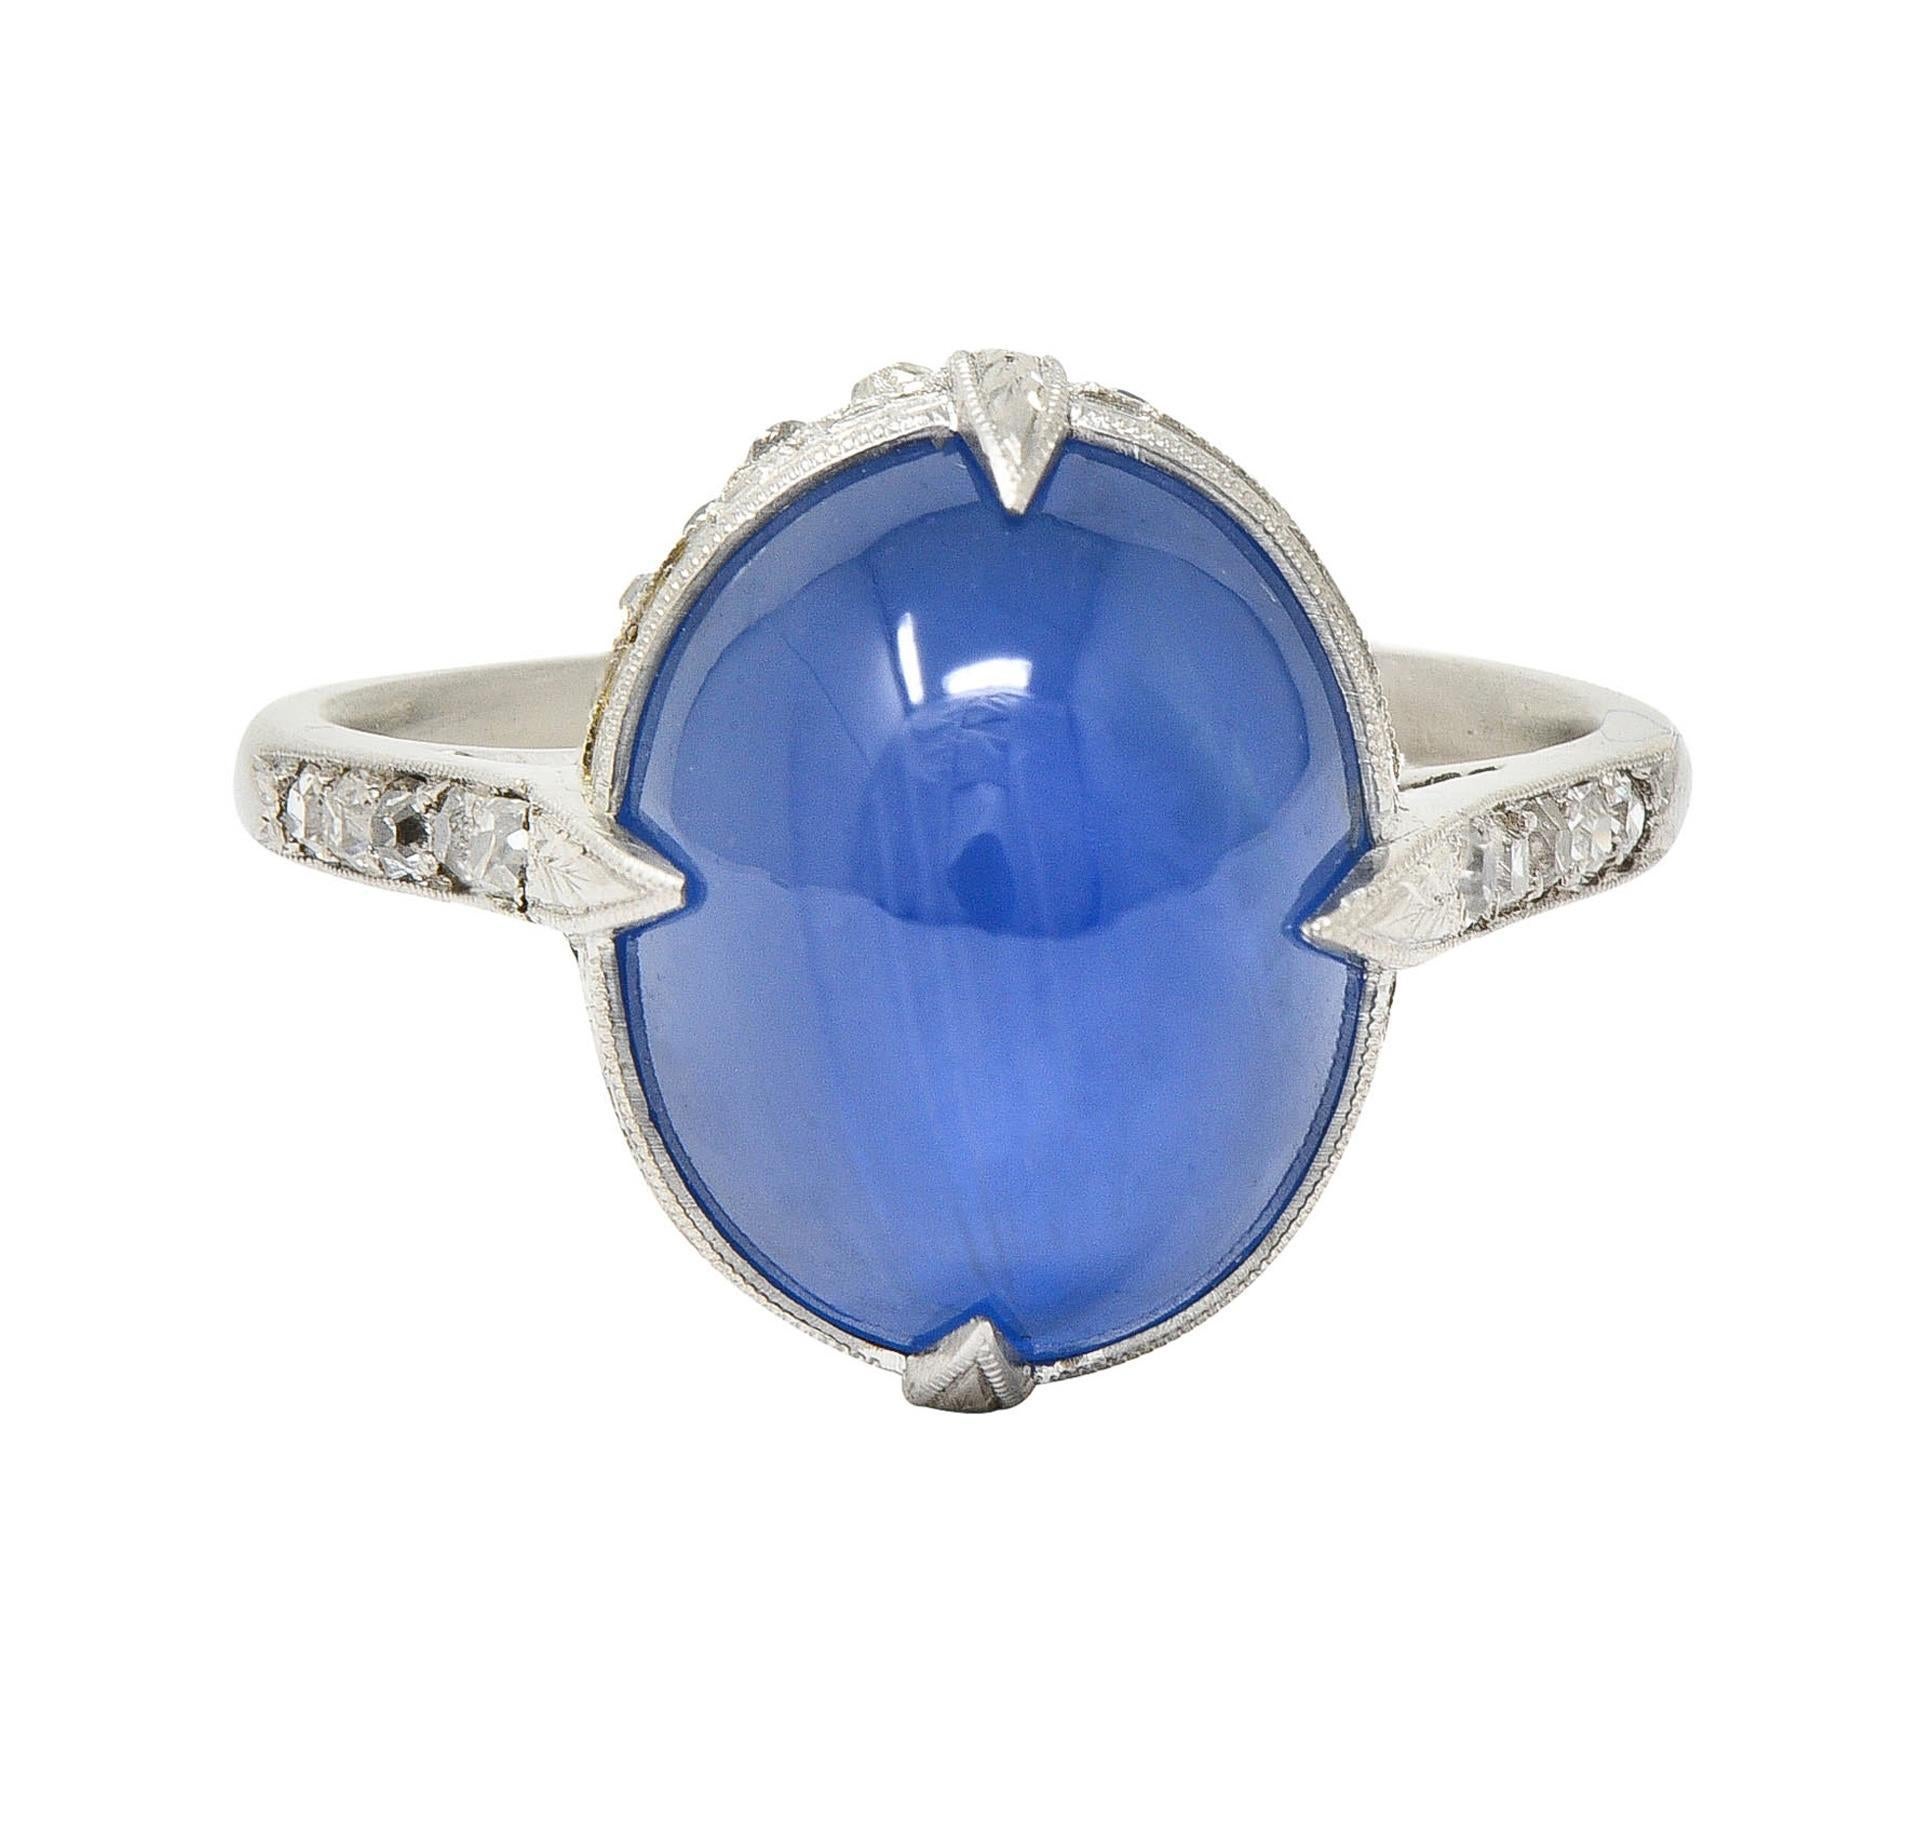 Centering an oval-shaped sapphire cabochon weighing 9.70 carats - transparent medium blue
Natural Ceylon in origin with no indications of heat treatment - displaying six-point asterism
Set with engraved foliate motif talon prongs and orange blossom